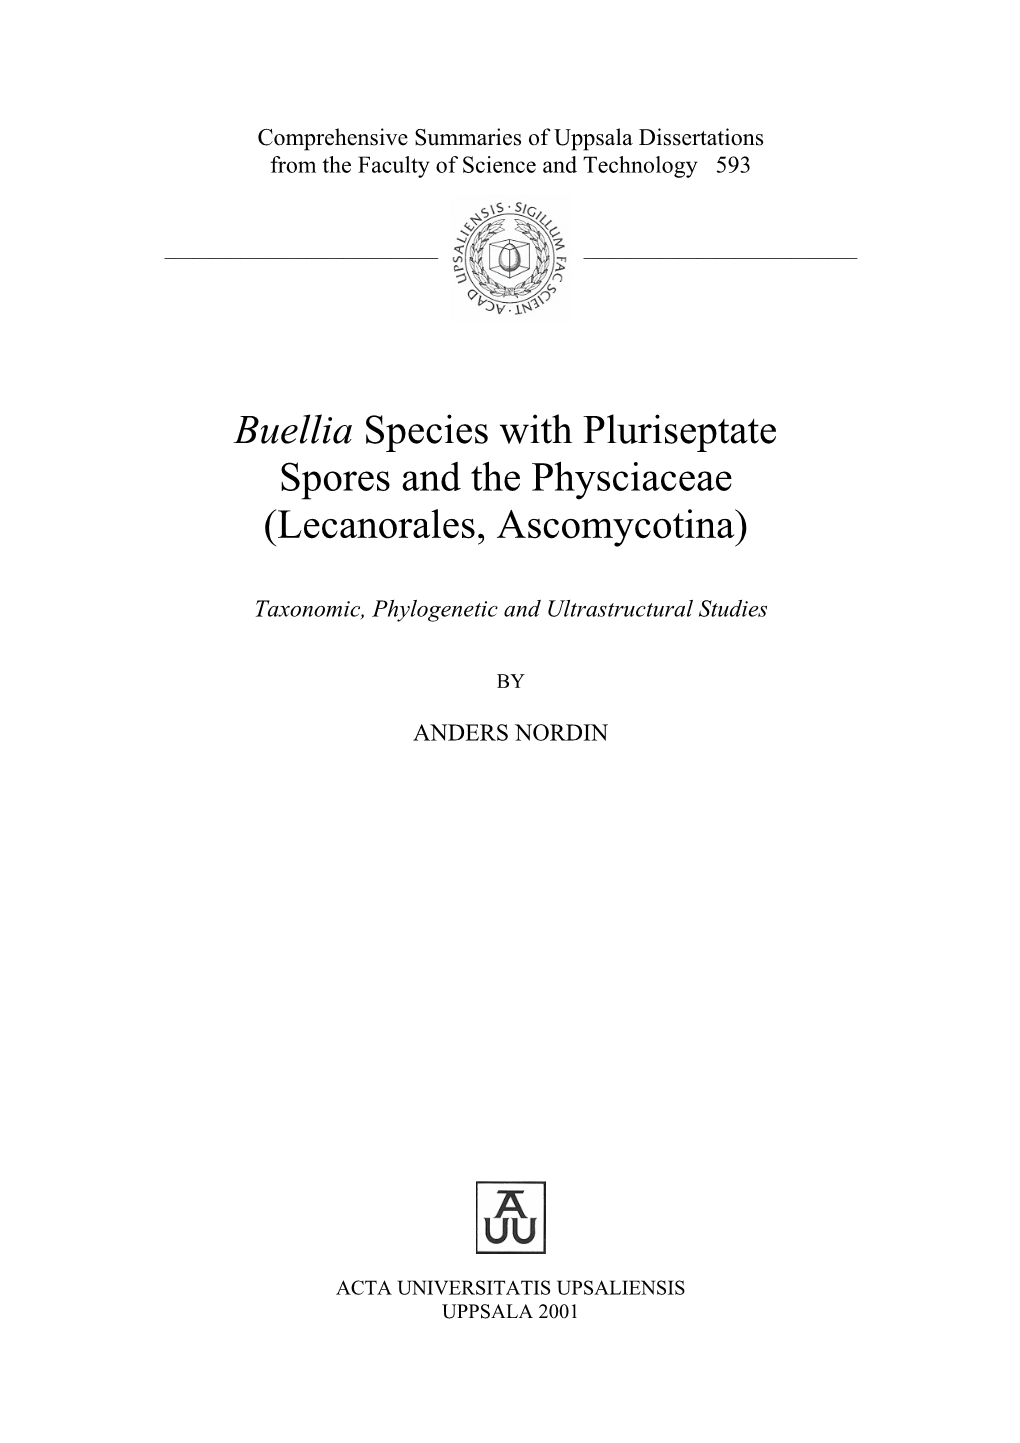 Buellia Species with Pluriseptate Spores and the Physciaceae (Lecanorales, Ascomycotina)